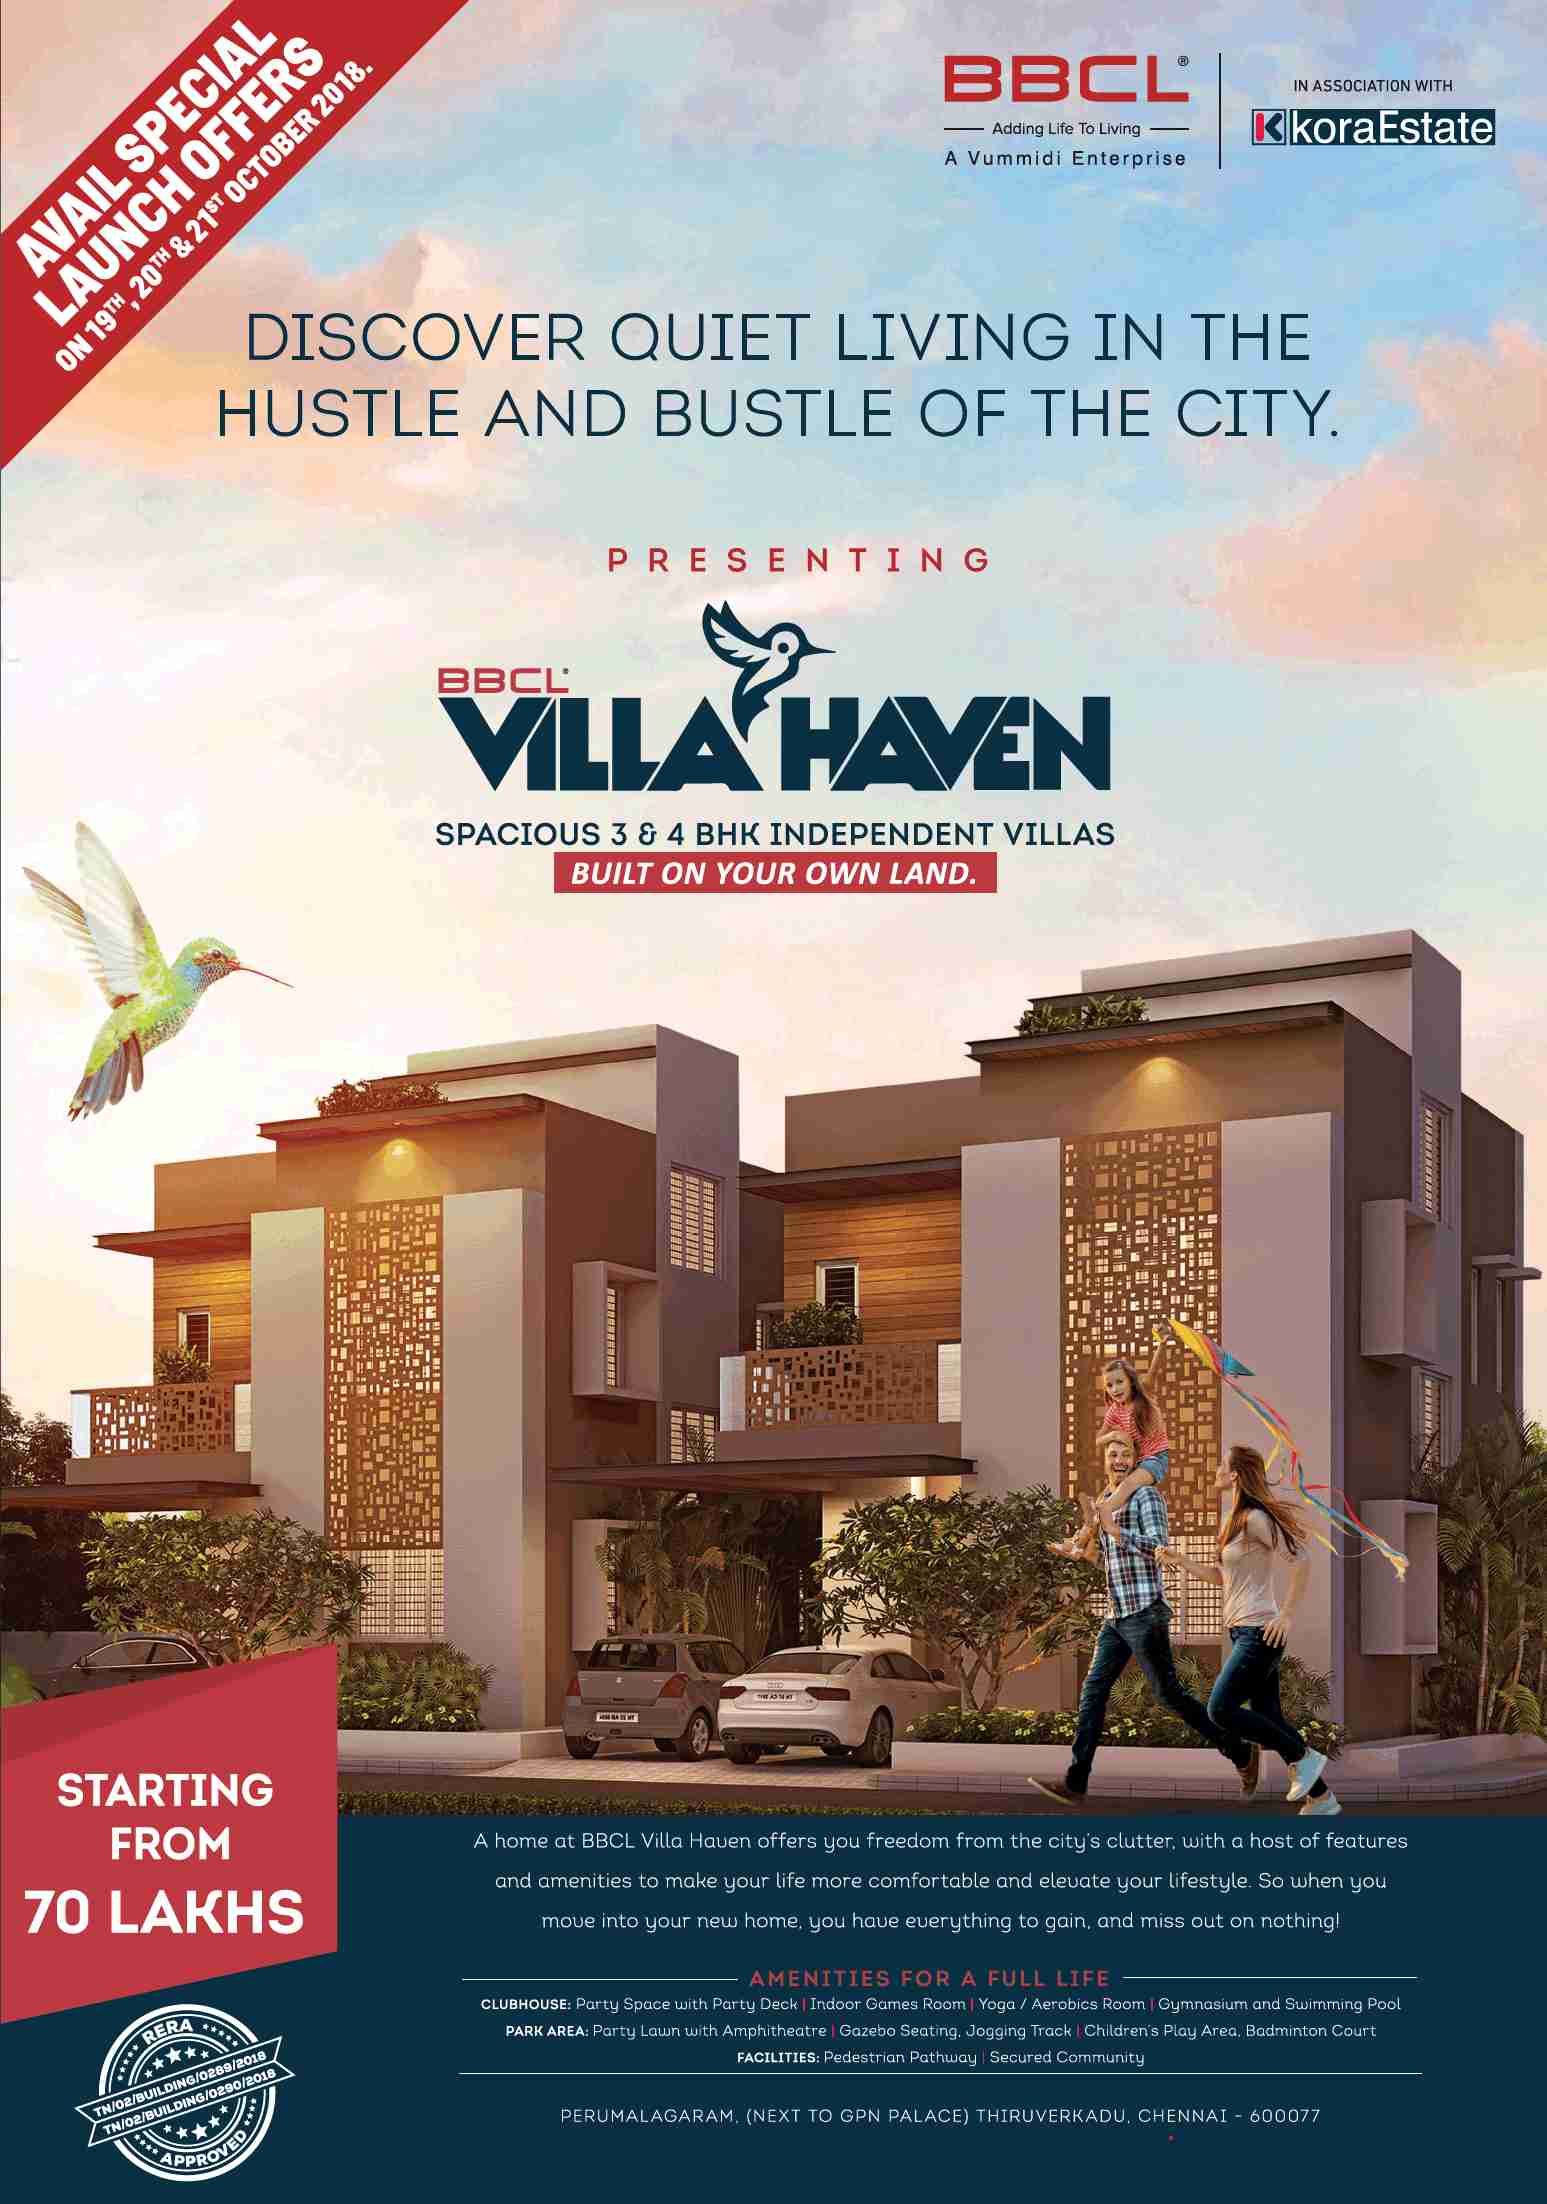 Book spacious 3 & 4 BHK independent villas @ Rs 70 Lakhs at BBCL Villa Haven in Chennai